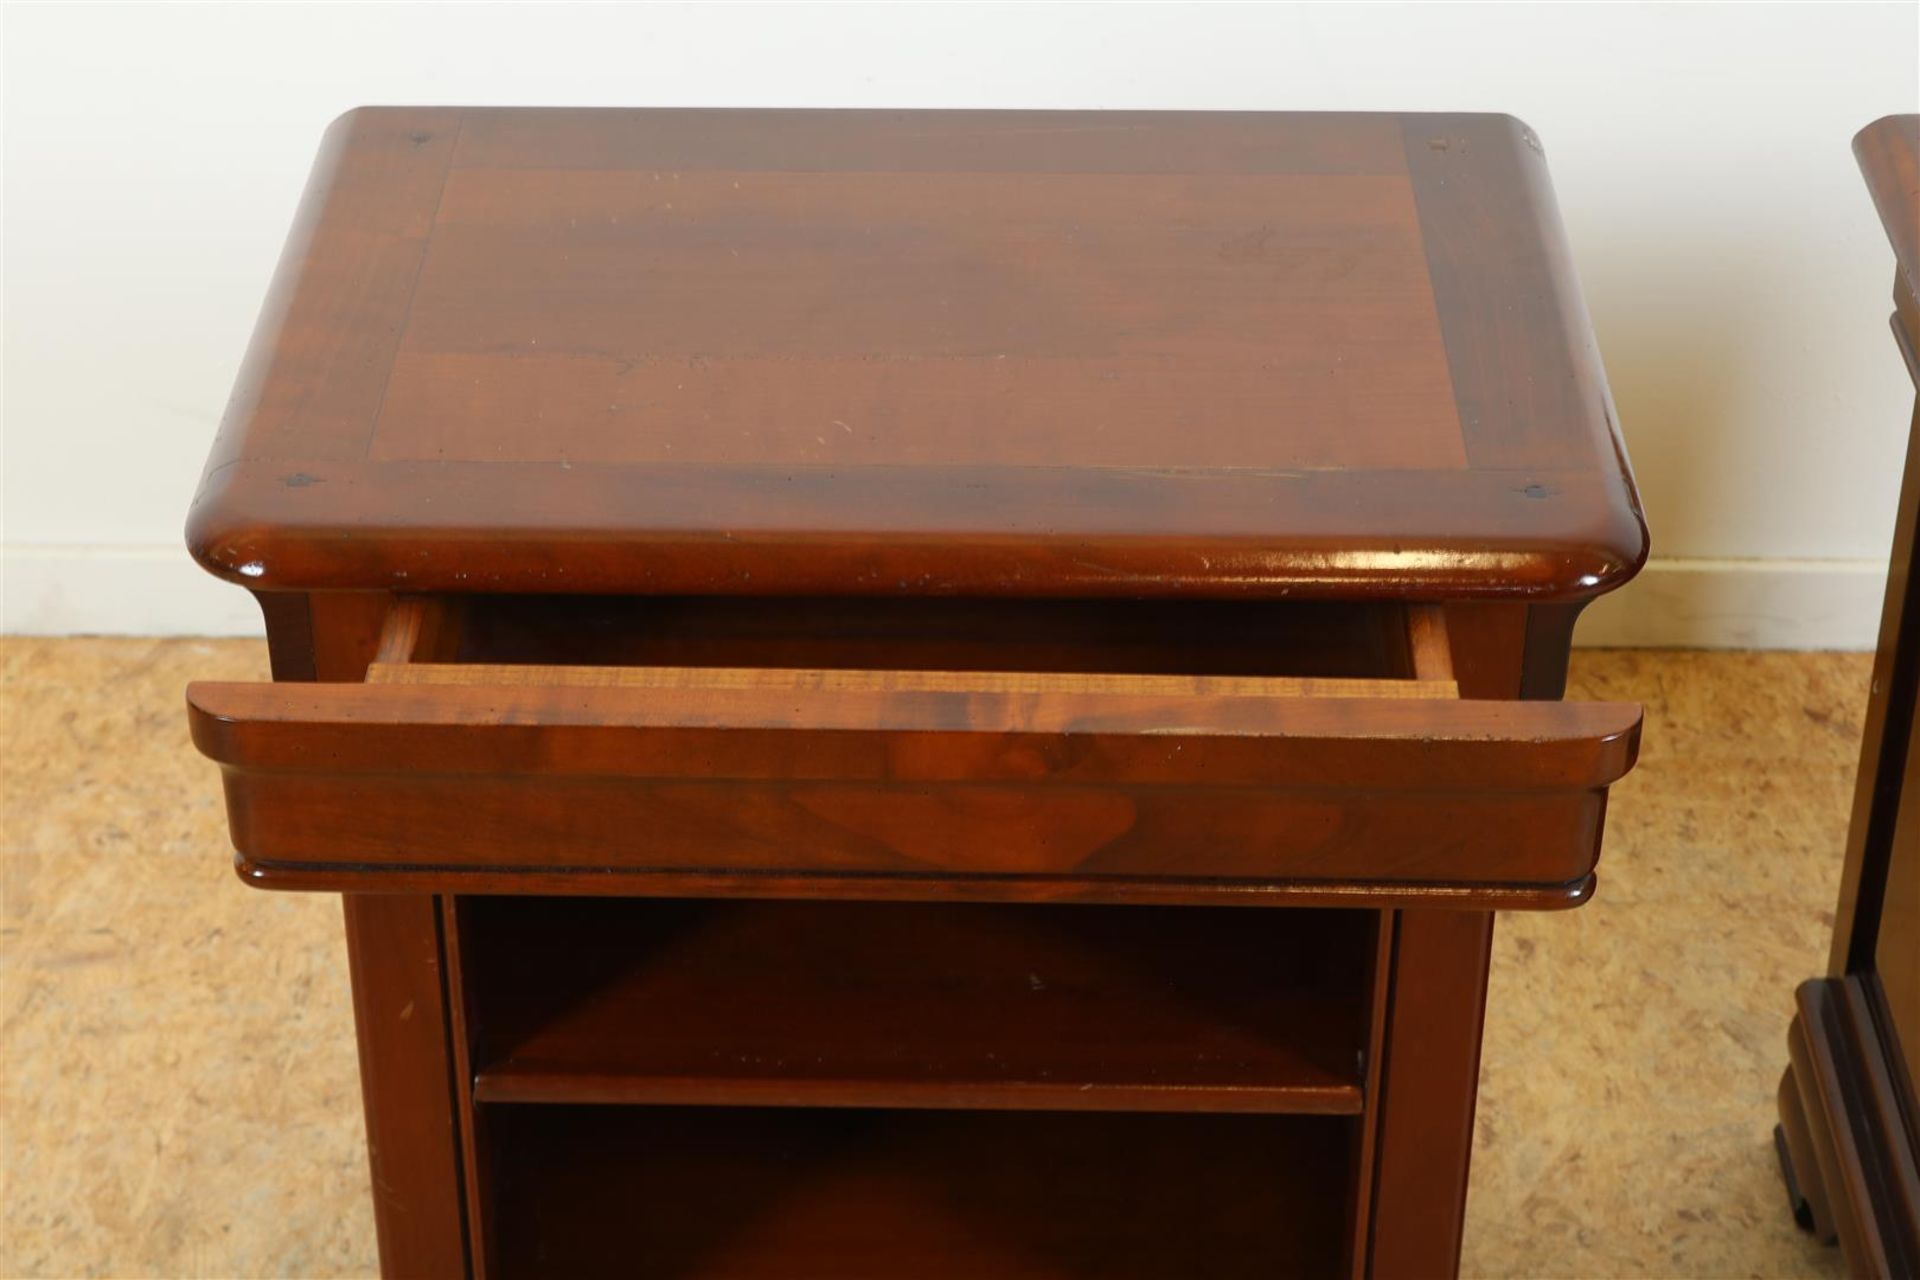 Set of cherry wood veneered bedside tables with drawer, h. 55, w. 53, d. 37 cm. - Image 2 of 3